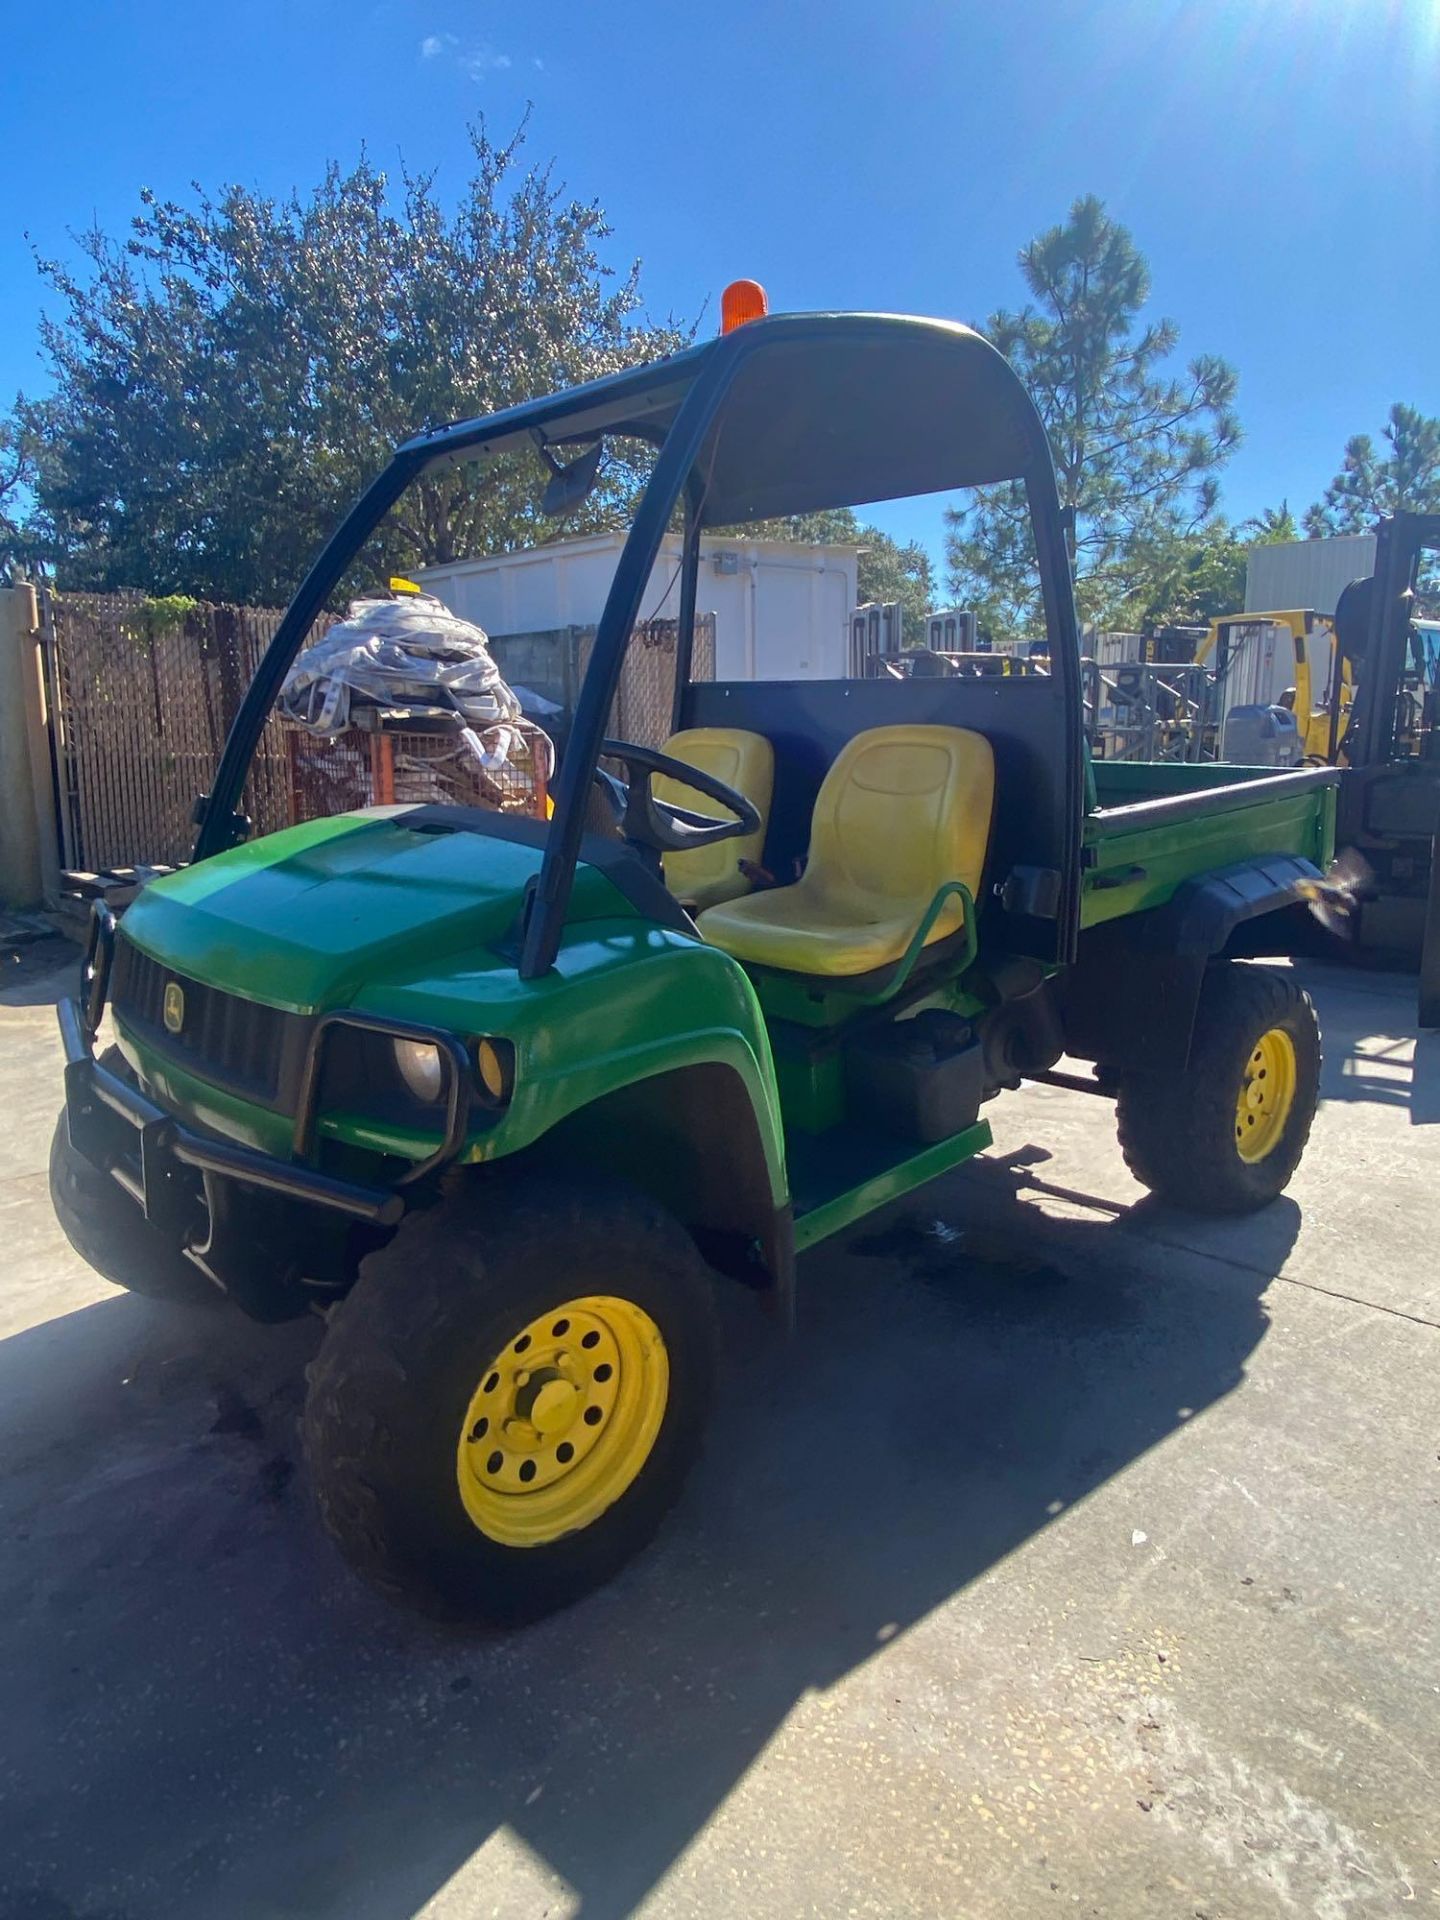 JOHN DEERE GATOR XUV ATV WITH DUMP BED, GAS POWERED, 1,713 HOURS SHOWING, RUNS AND DRIVES - Image 8 of 9